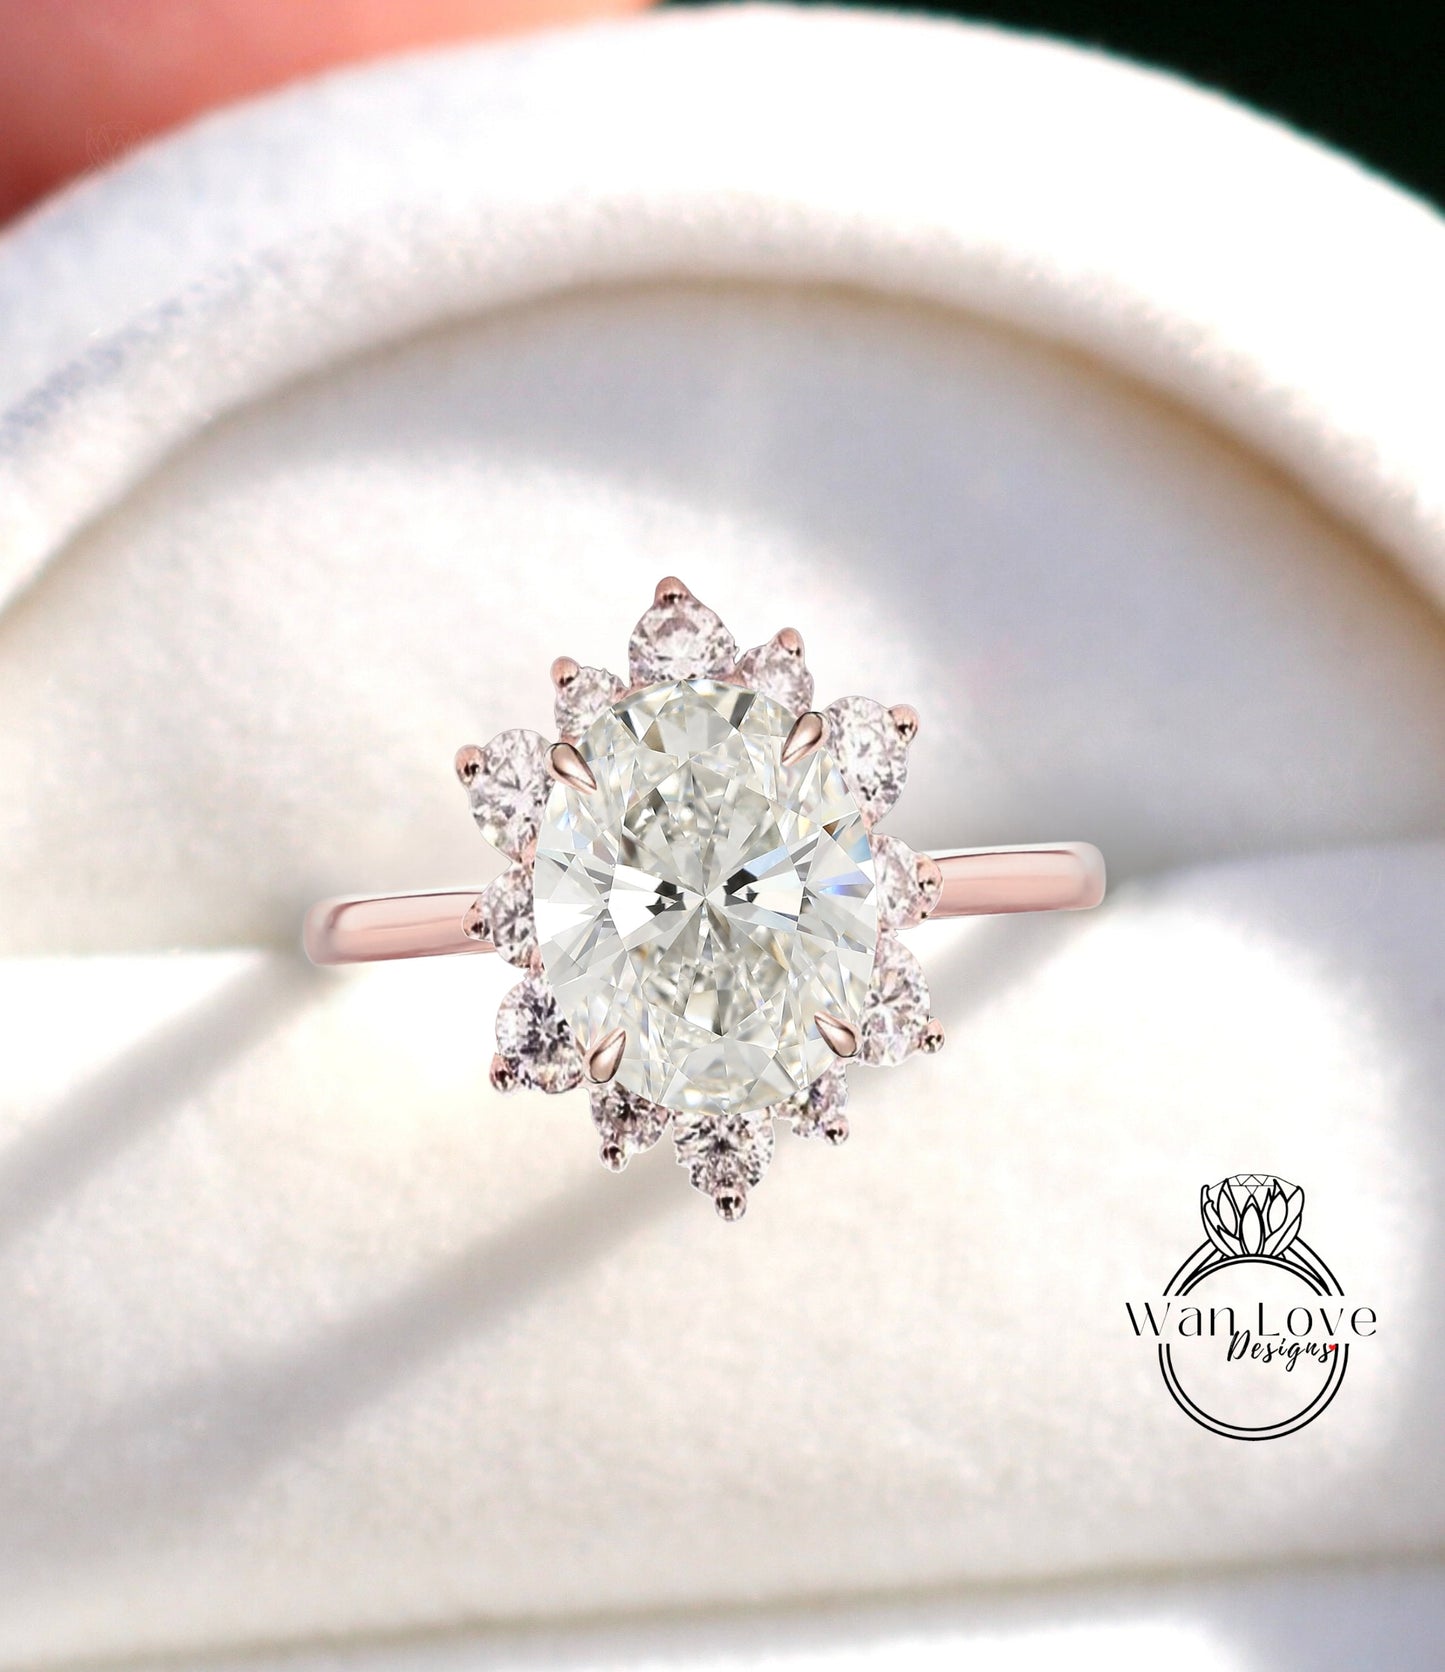 Oval lab diamond engagement ring halo ring vintage snowflake certified diamond ring rose gold ring art deco ring promise ring anniversary